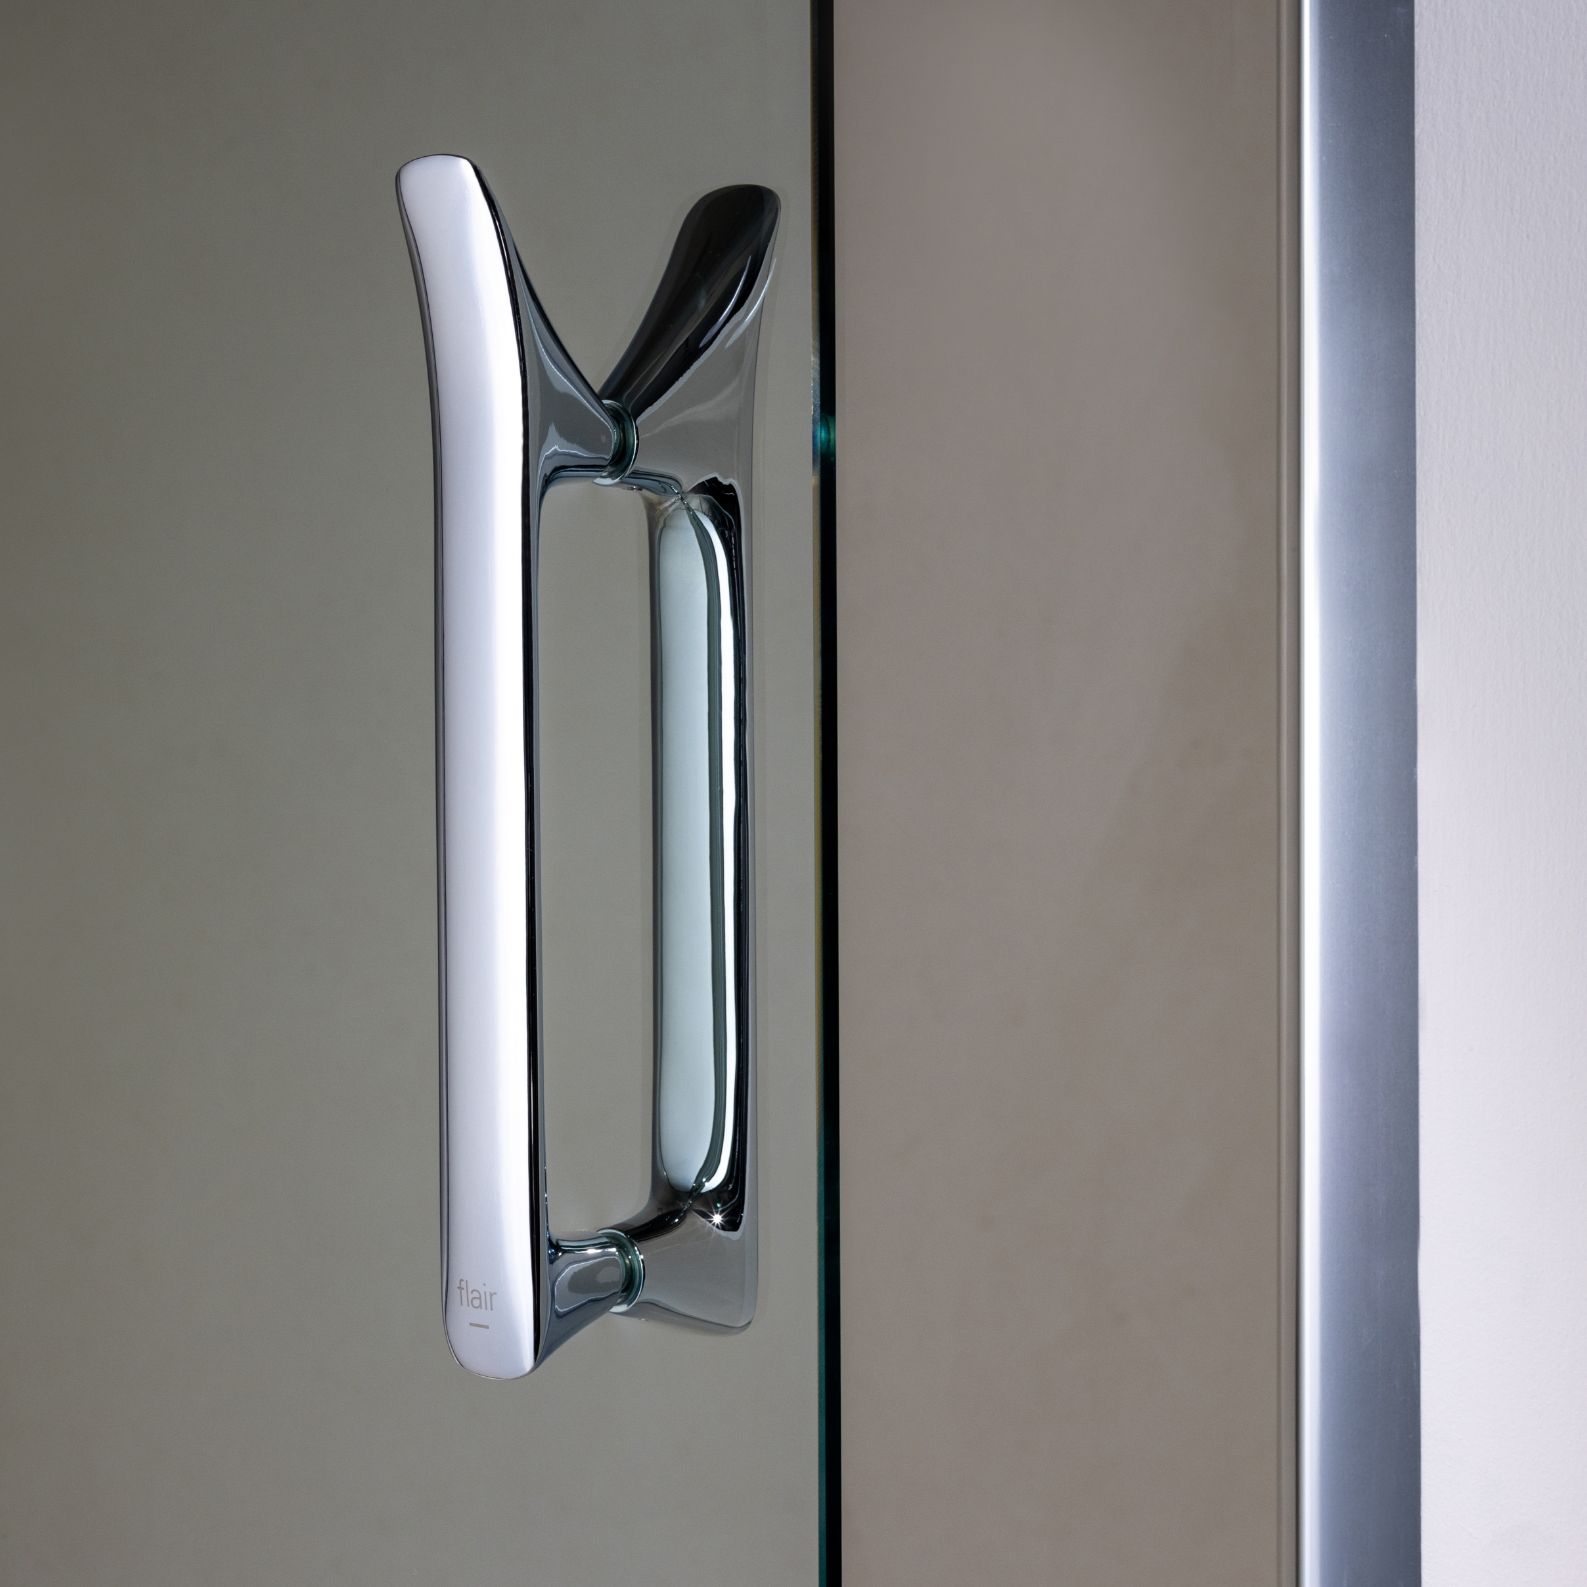 Signature handle design - a precisely crafted, solid, chrome plated handle featuring an integrated robe hook.